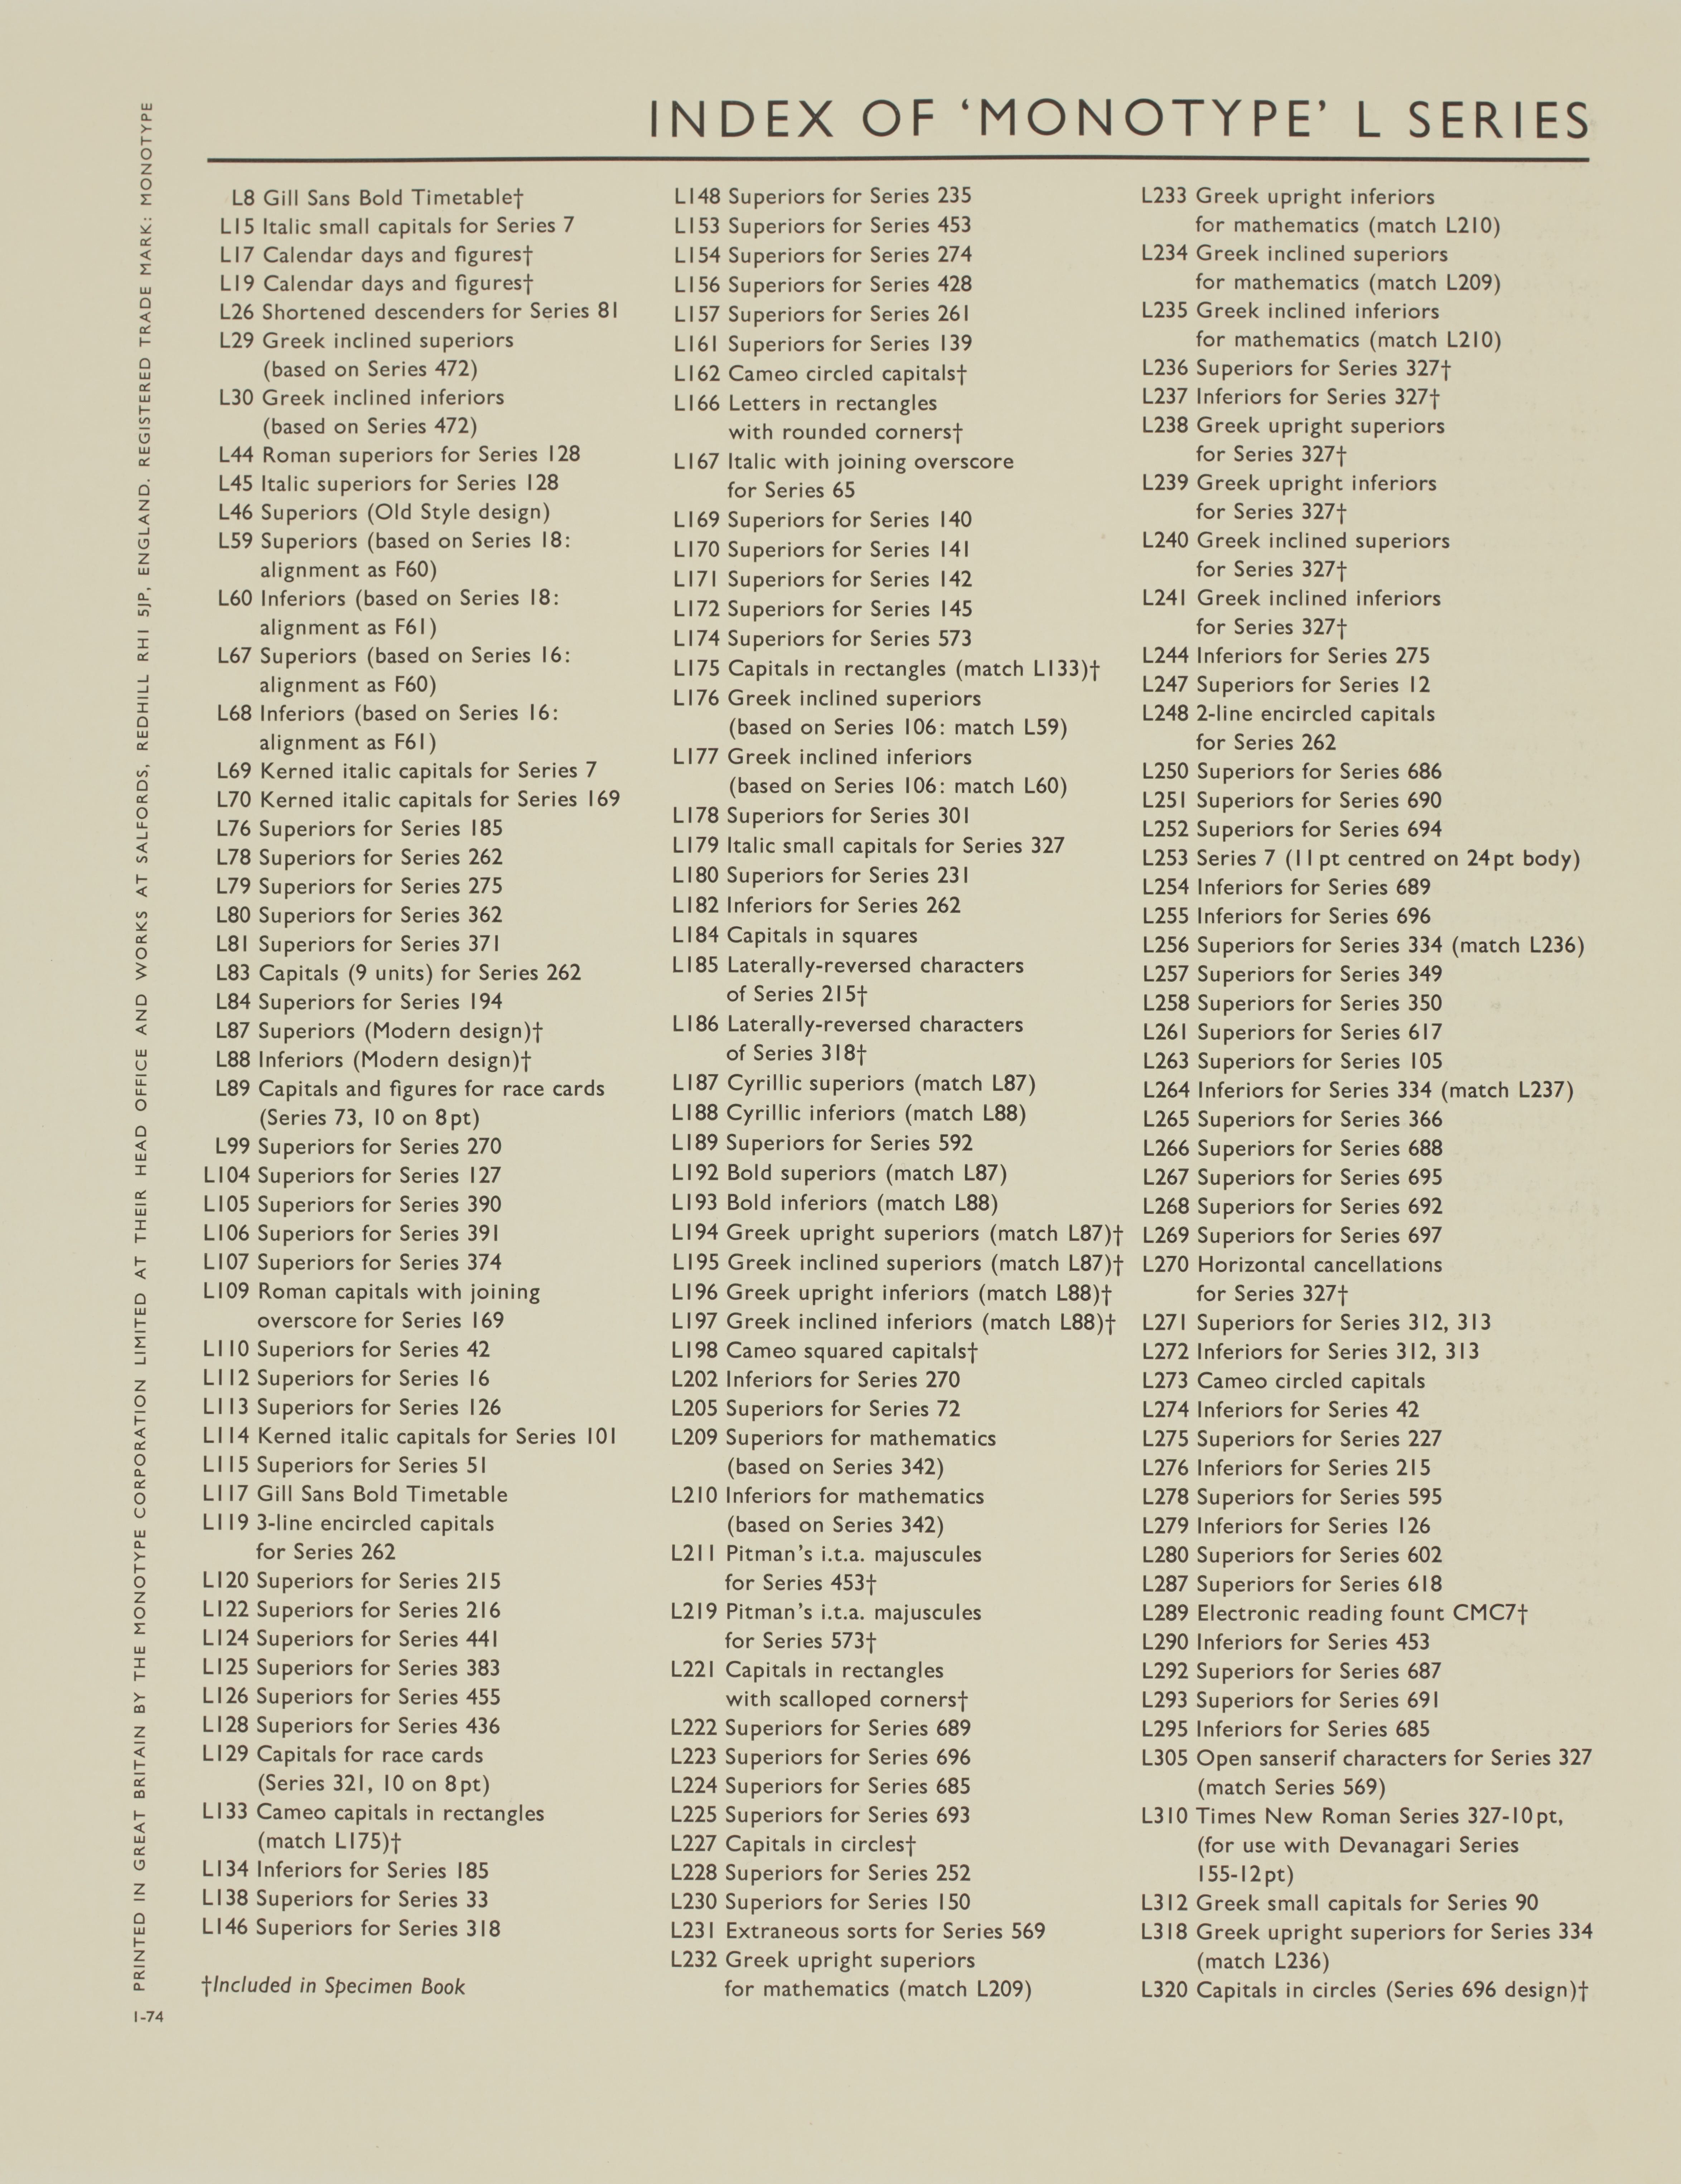 A list of series of founts whose numbers begin with L,
with L231 listed as Extraneous sorts for Series 569.
The series with a dagger annotation are included in this specimen book;
L231 is not one of them.